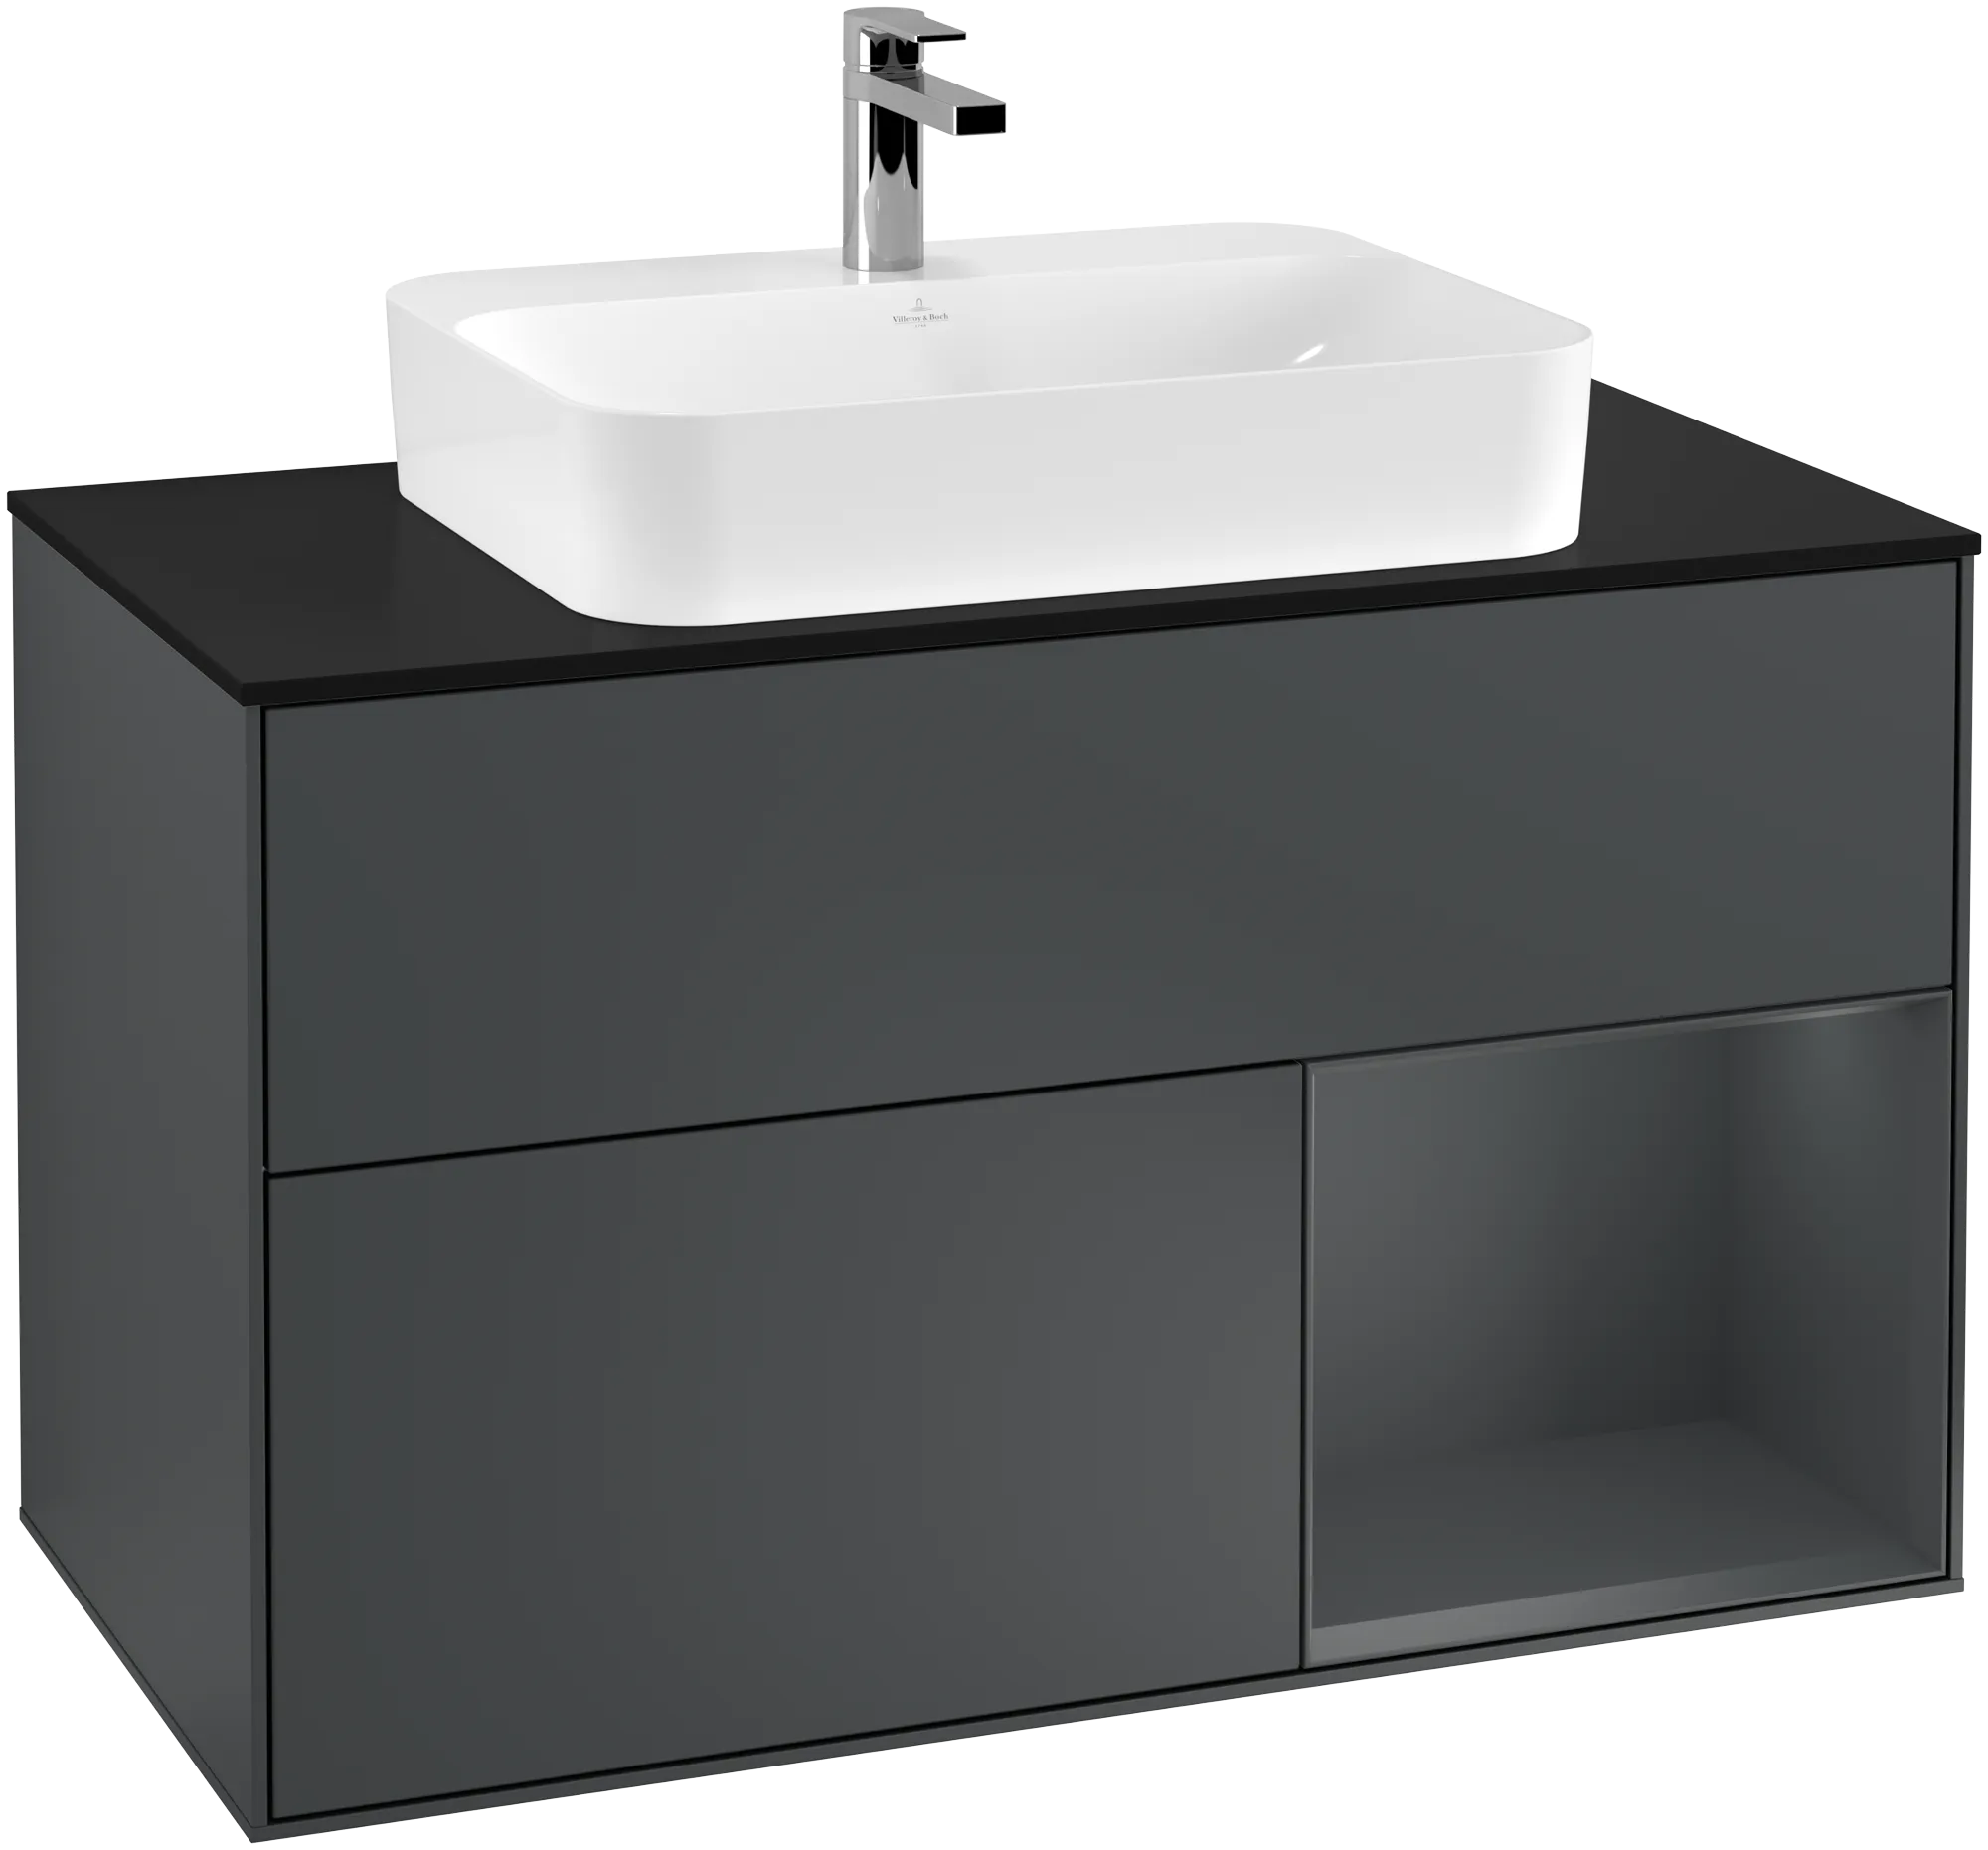 VILLEROY BOCH Finion Vanity unit, with lighting, 2 pull-out compartments, 1000 x 603 x 501 mm, Midnight Blue Matt Lacquer / Midnight Blue Matt Lacquer / Glass Black Matt #G372HGHG resmi